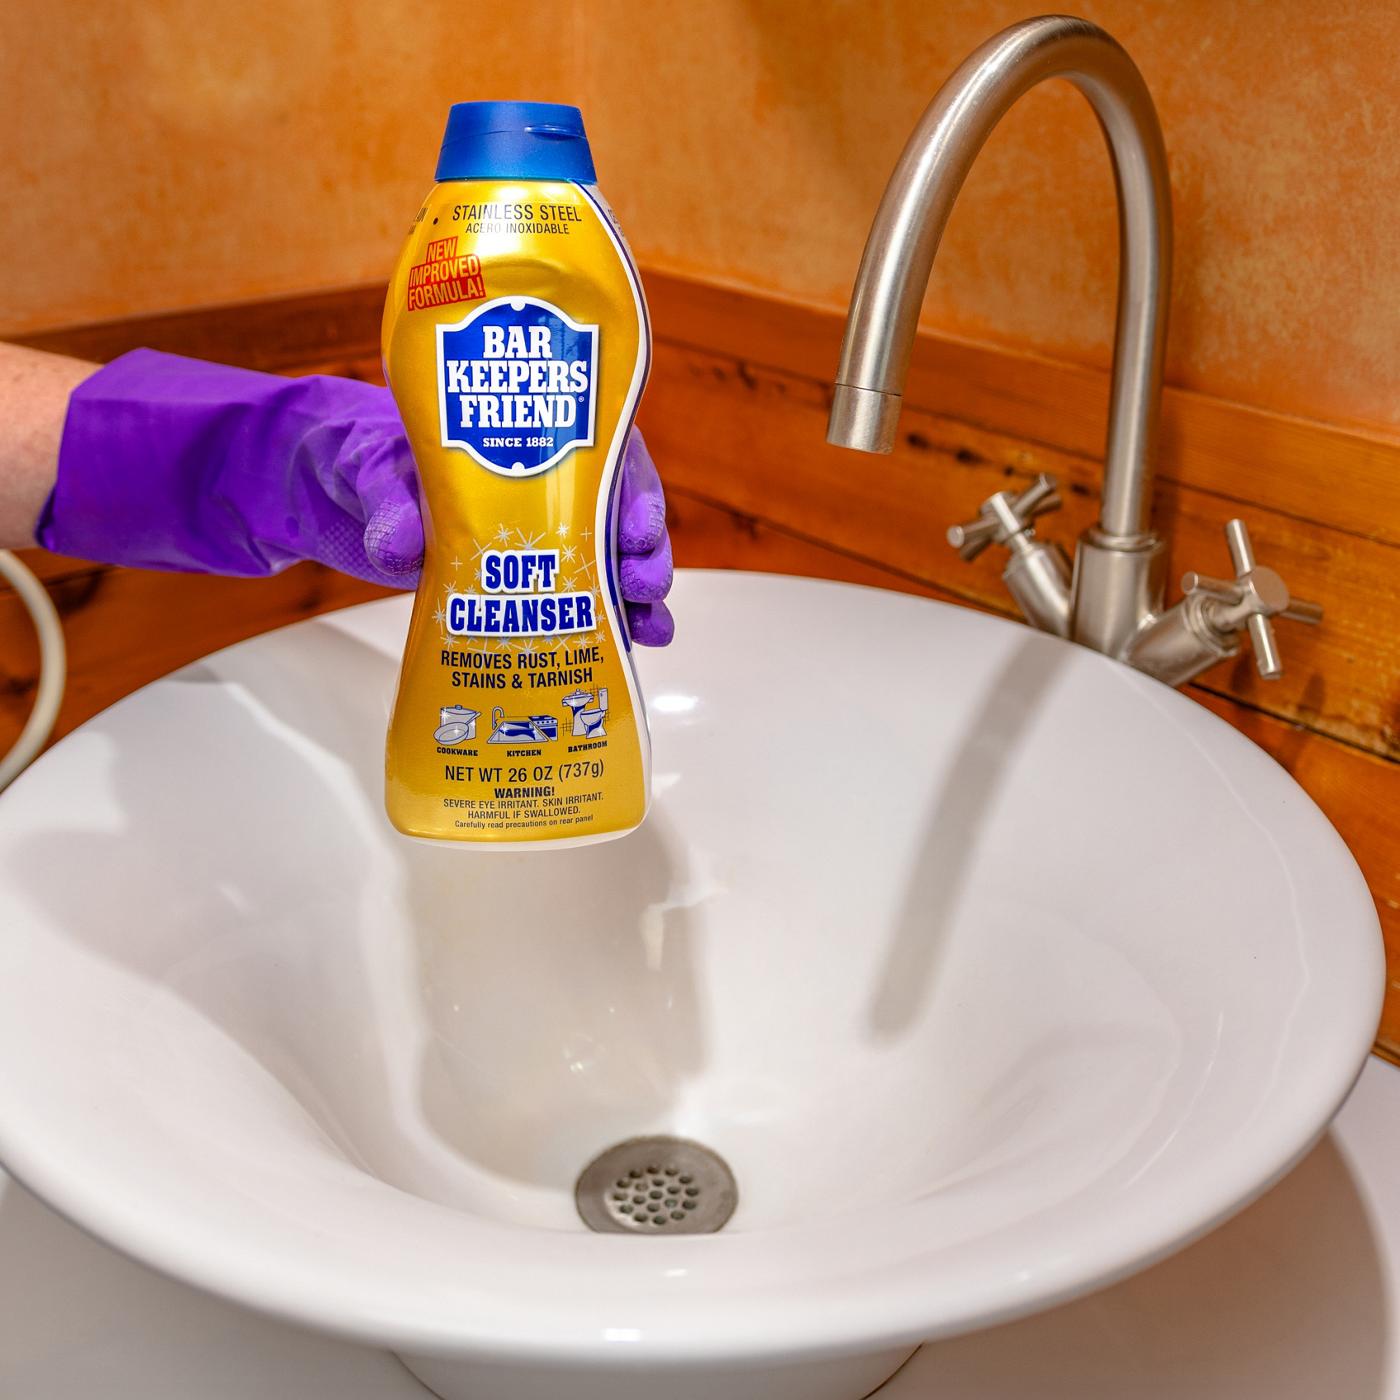 Bar Keepers Friend Soft Cleanser; image 3 of 4